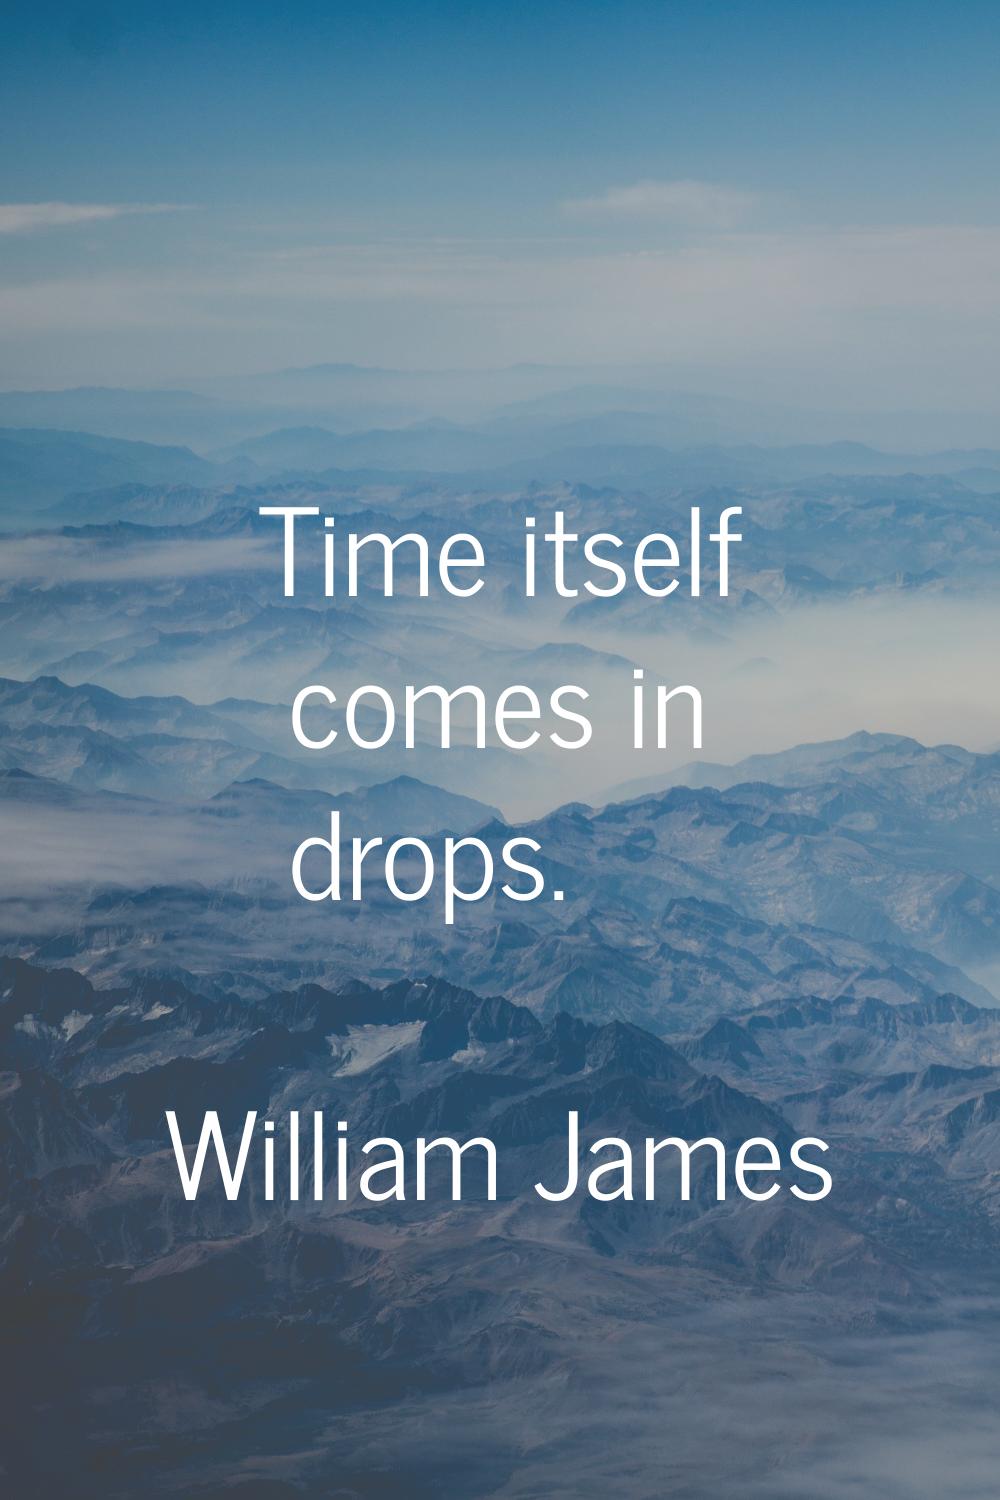 Time itself comes in drops.